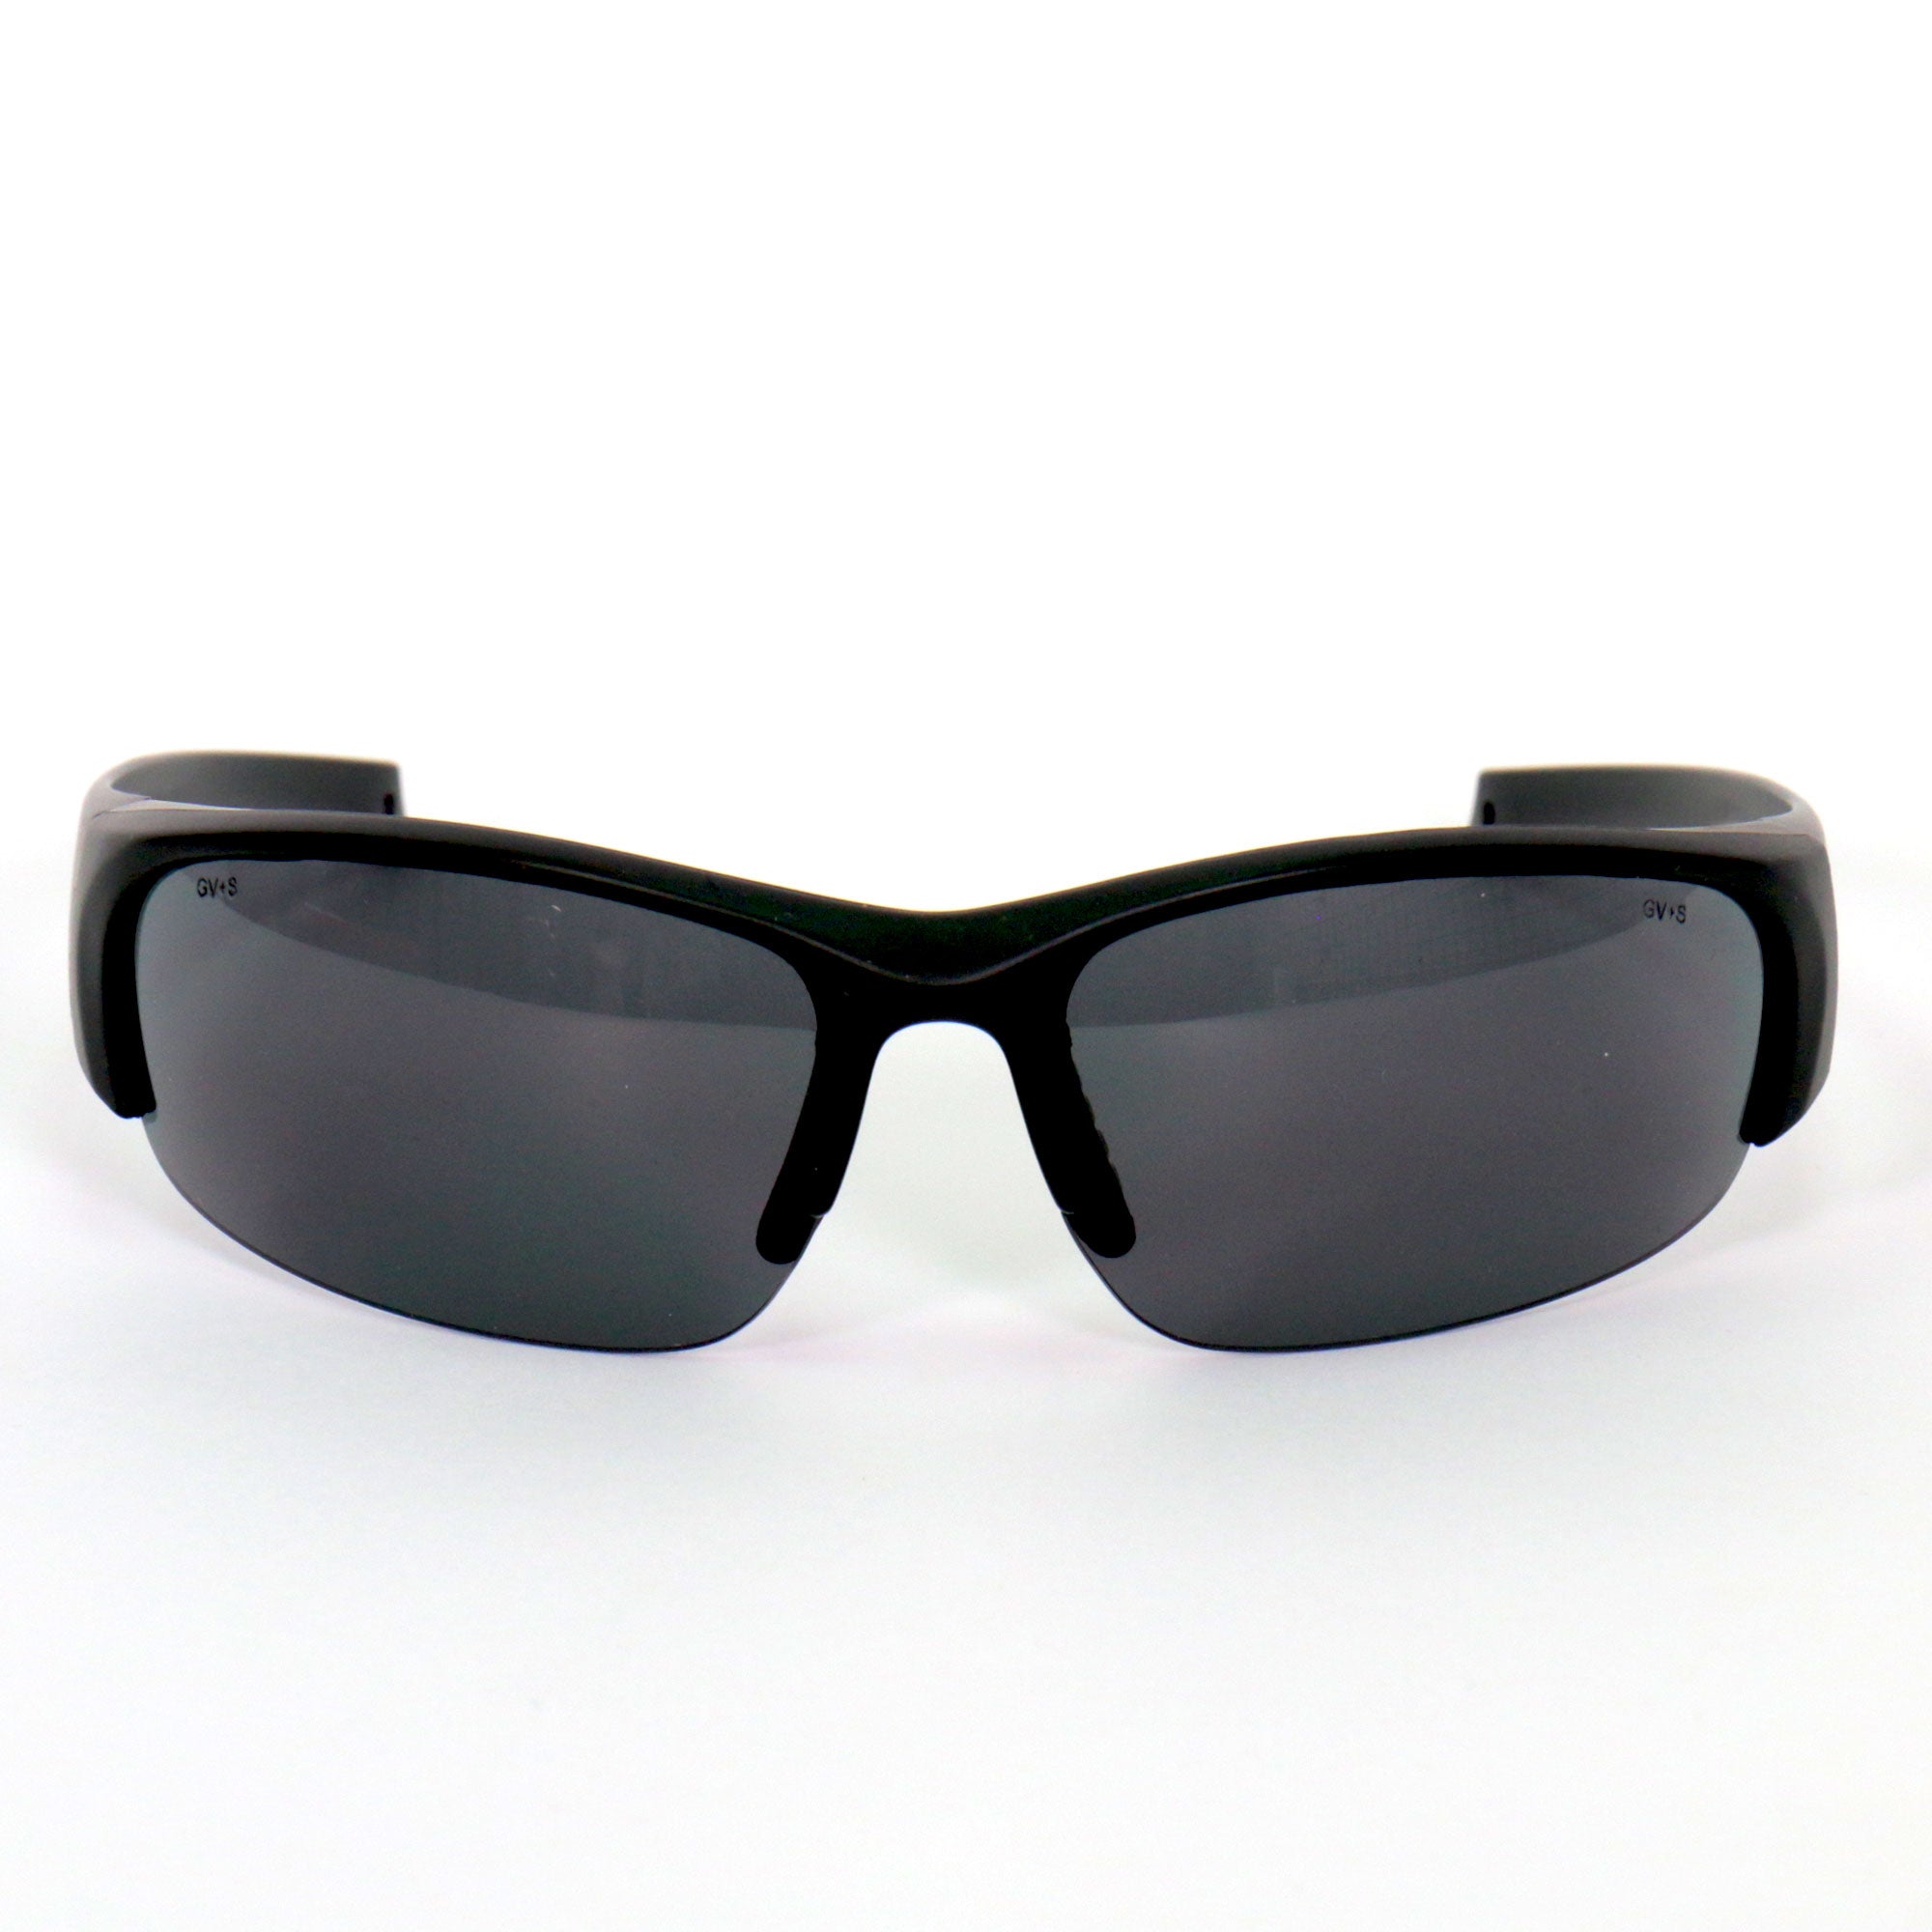 Hot Leathers Eazy Eyes Safety Sunglasses with Smoke Mirror Lenses